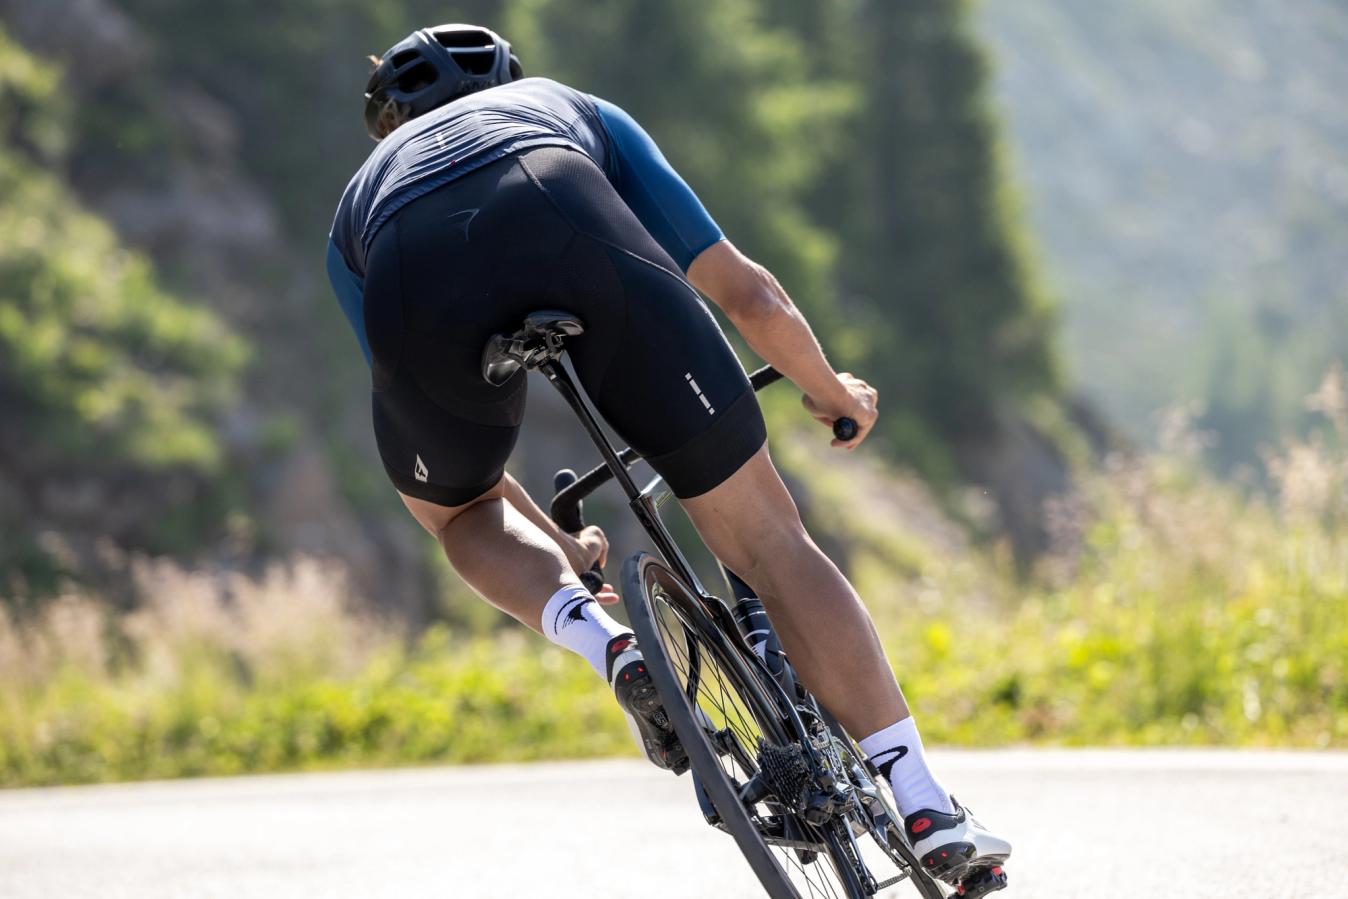 In both the Dogma F and F9 garments carbon fibre has been used in the construction to help with heat management